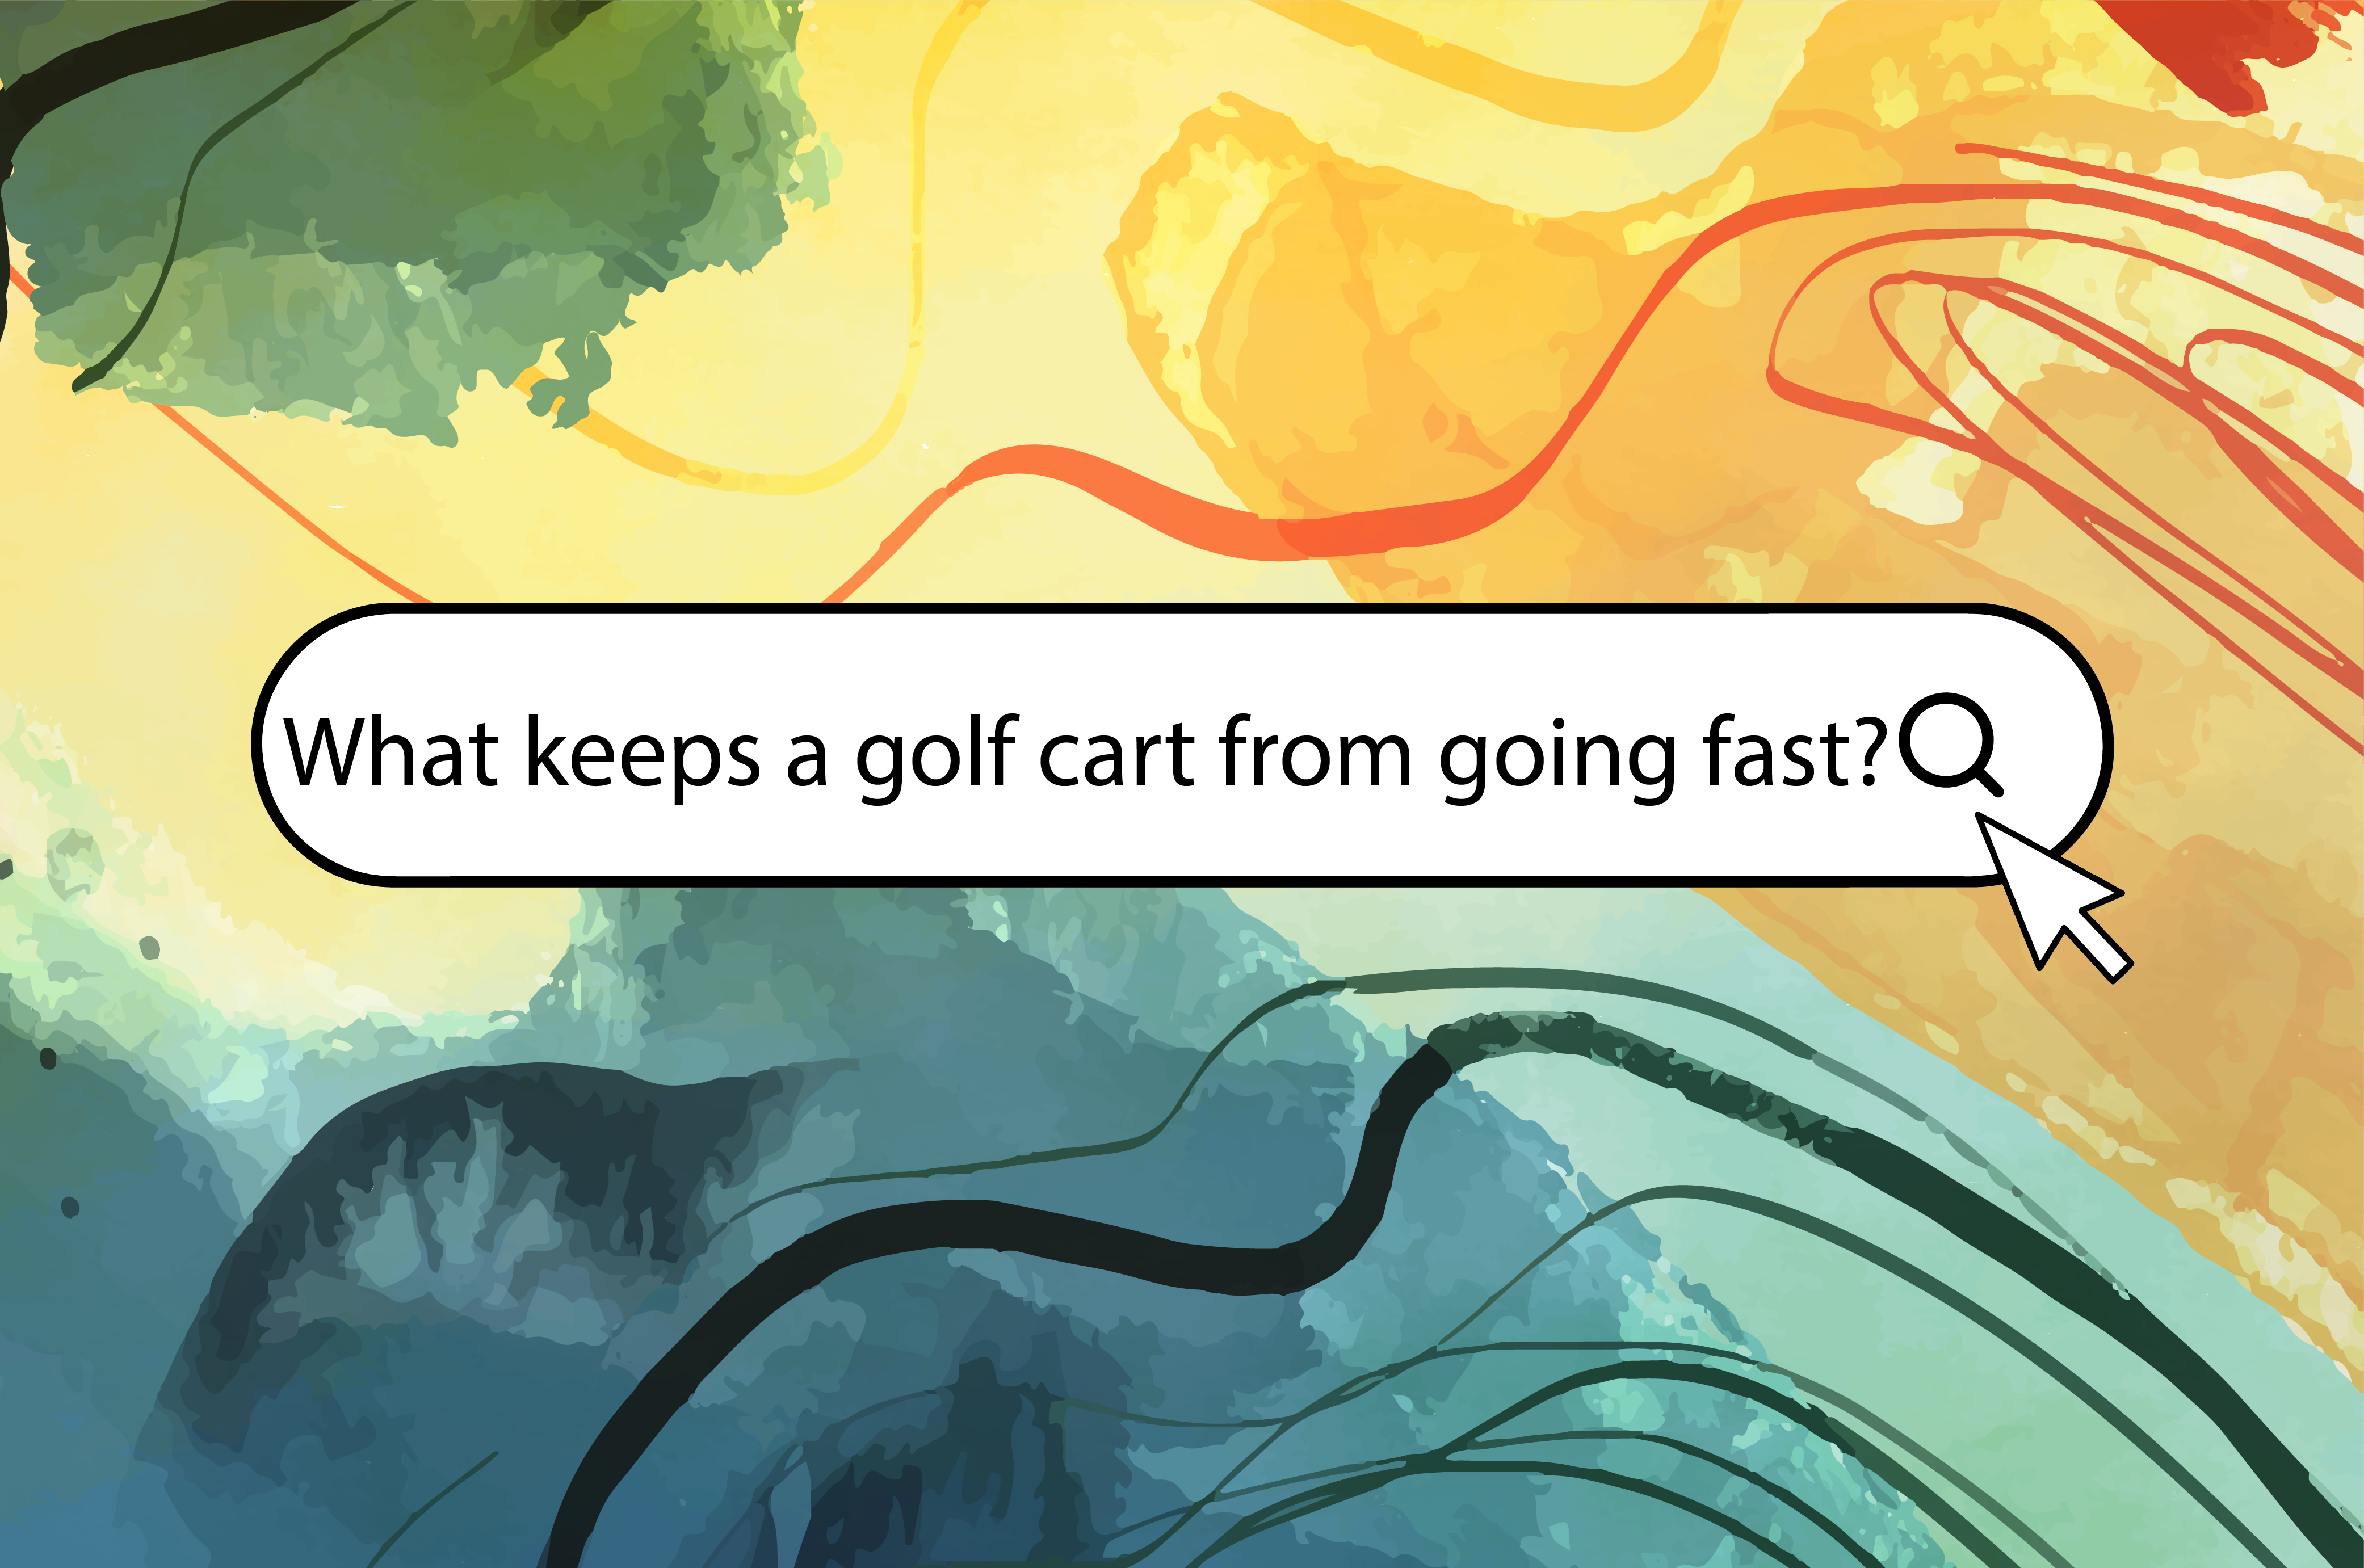 What keeps a golf cart from going fast?